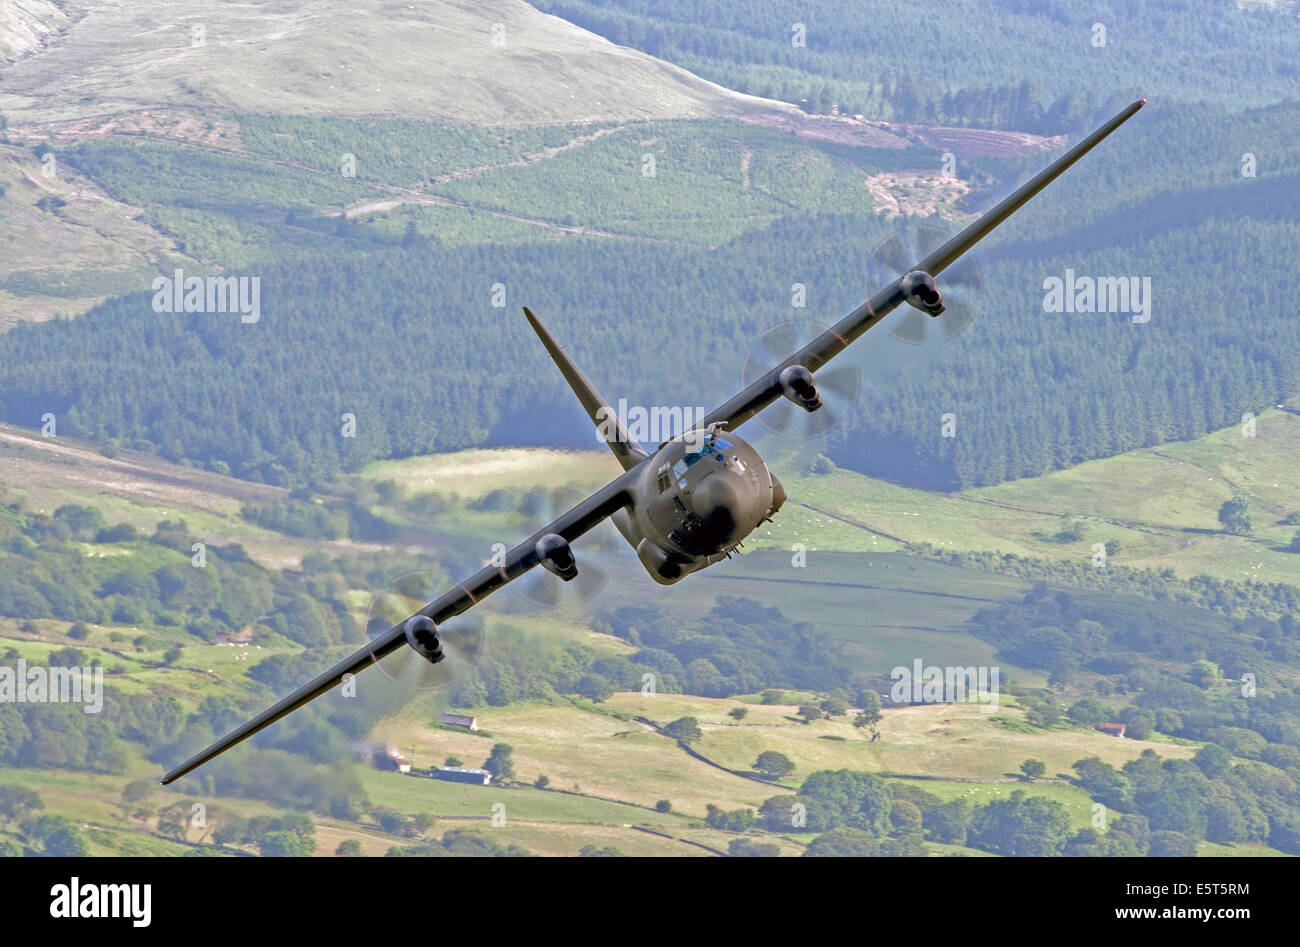 RAF C-130 Hercules flying low level in the Mach Loop area of Wales Stock Photo